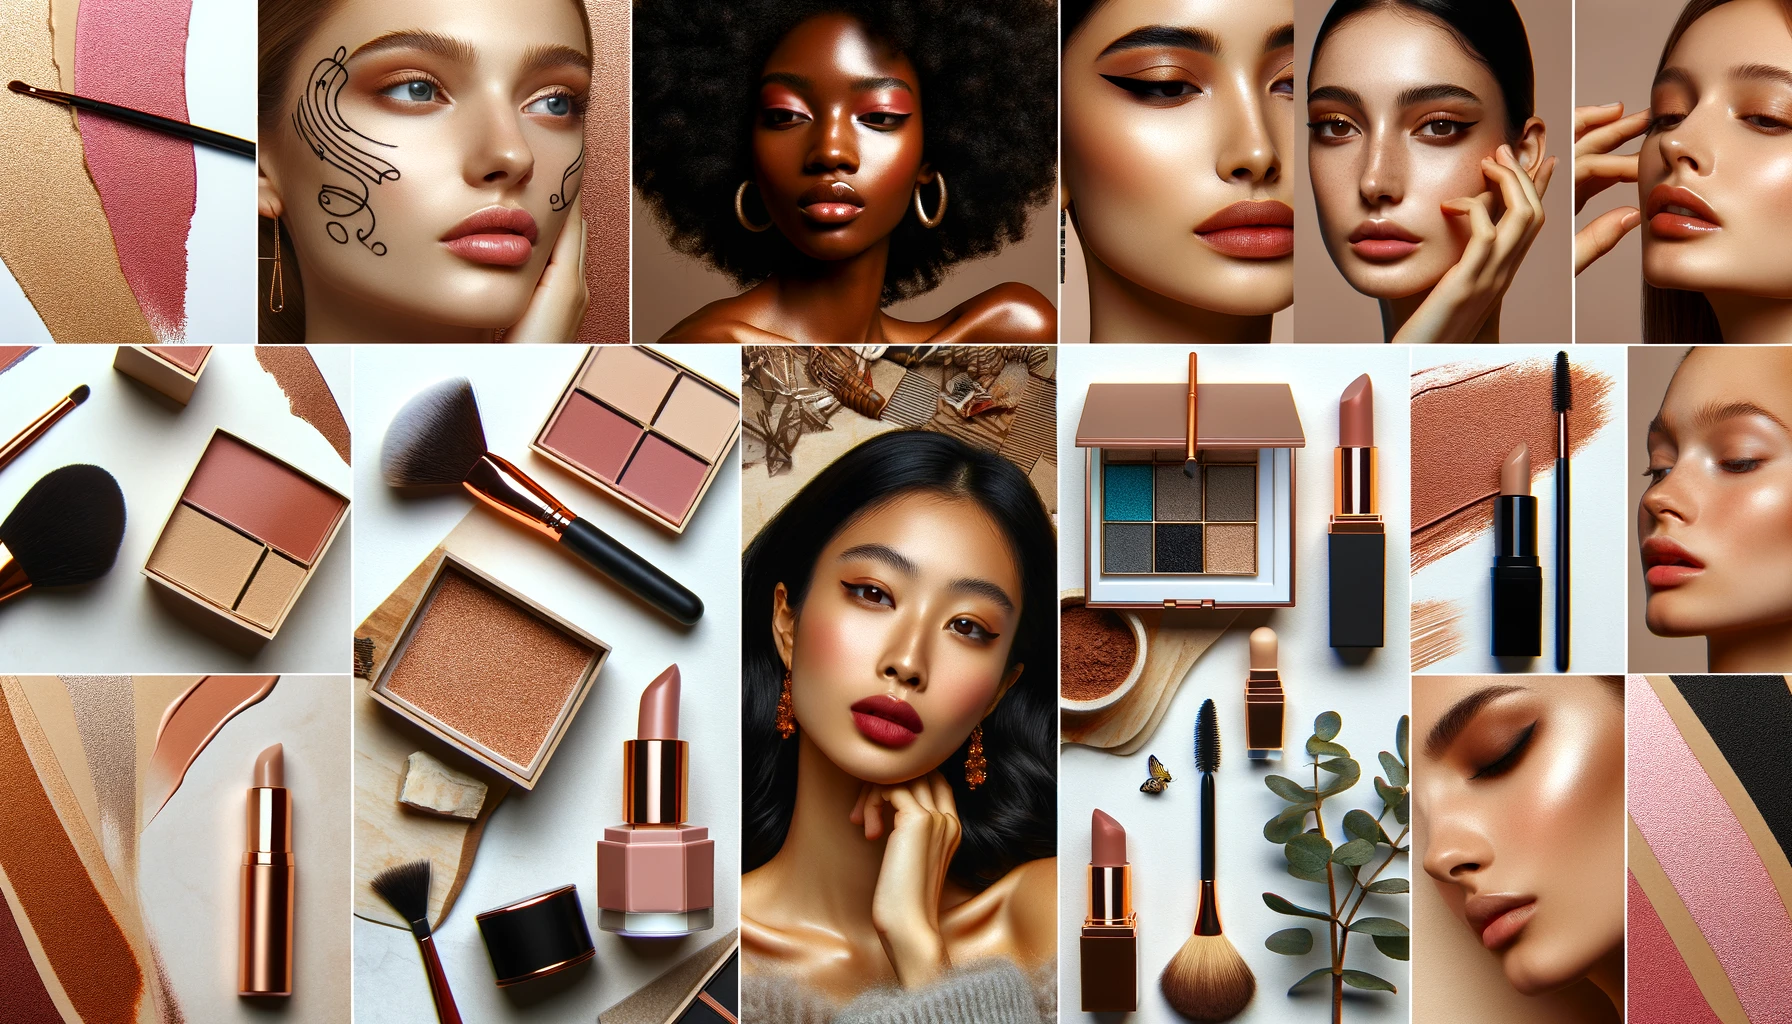  Collage of various Beauty Trends, including natural skincare and bold makeup, featured on Healthy Life - New Start.